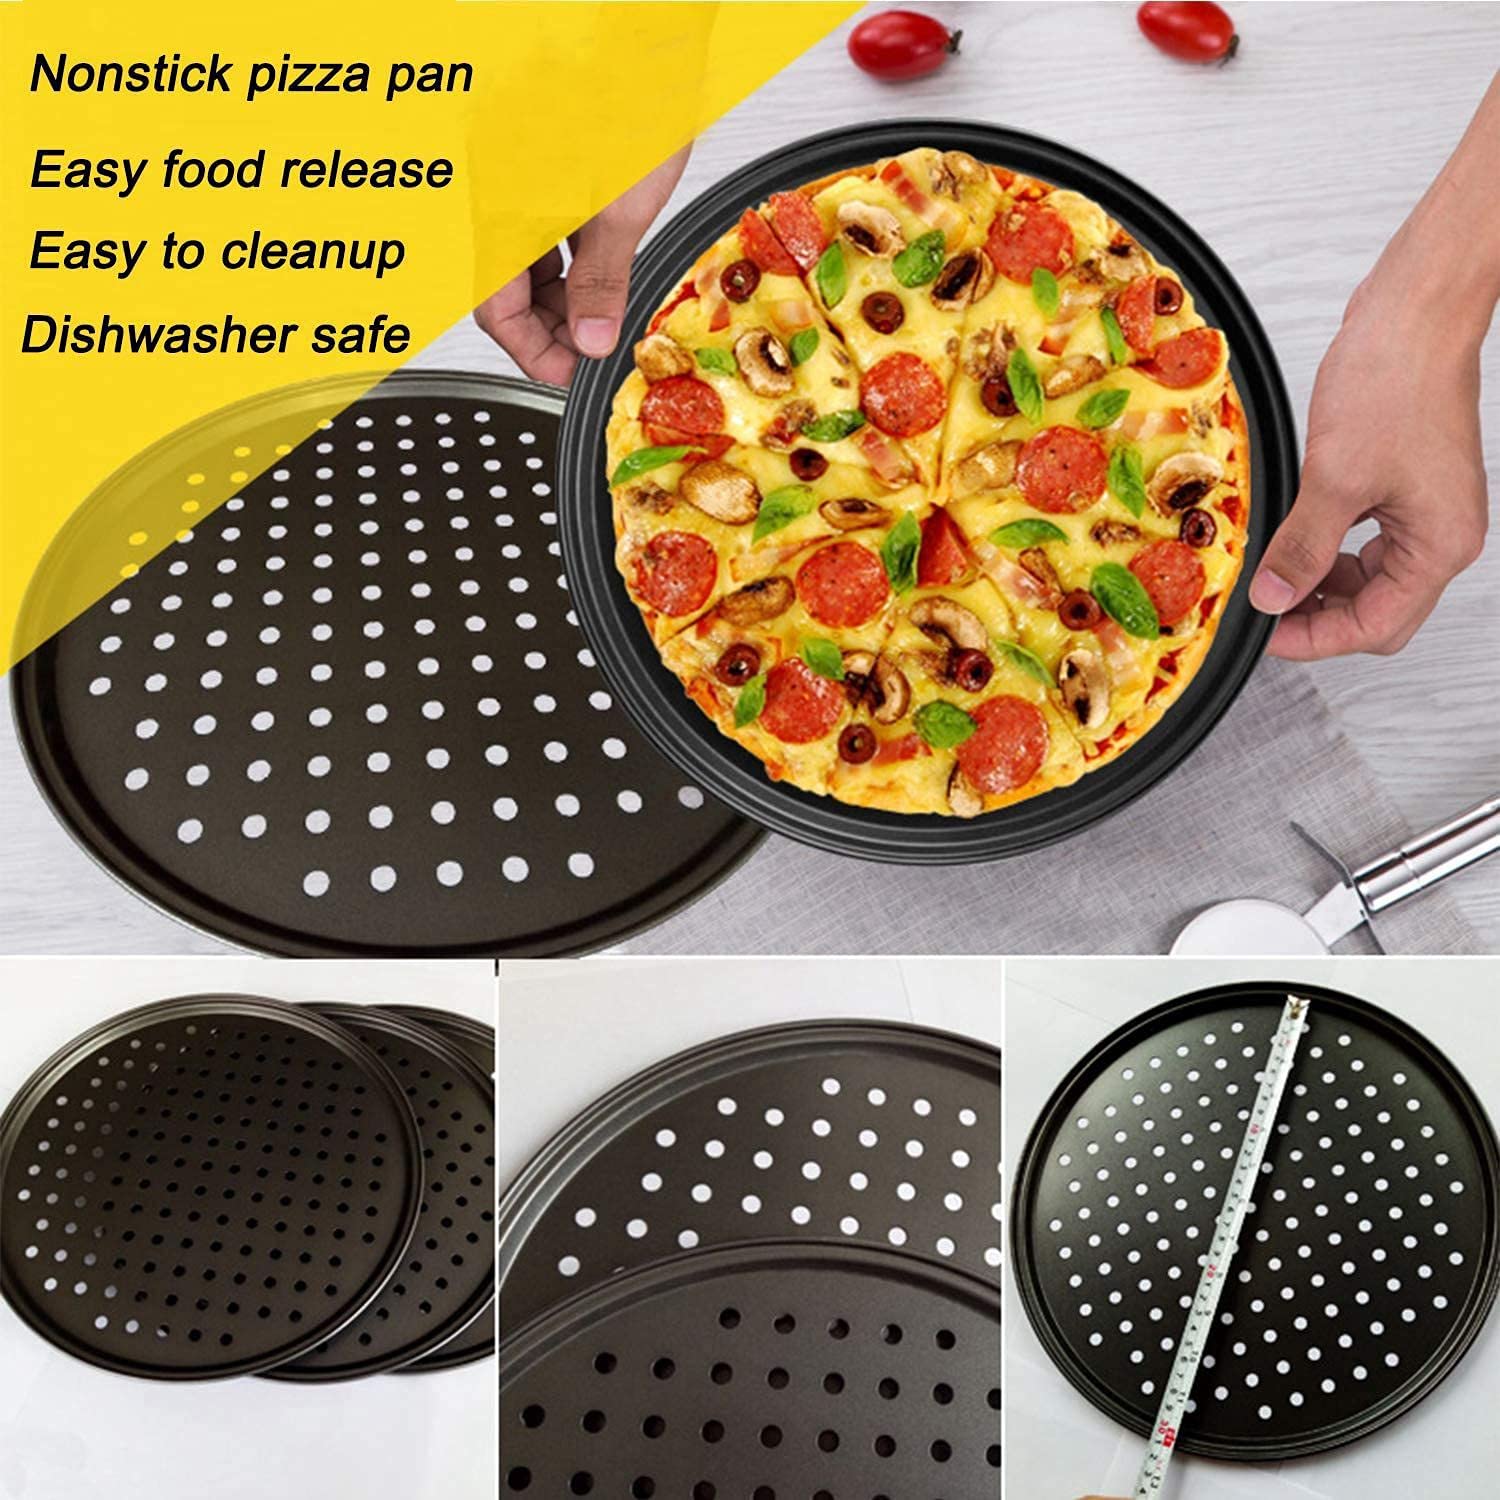 Jteyult 11 Inch Personal Perforated Pizza Pans Carbon Steel with Coating Easy to Clean Pizza Baking Tray